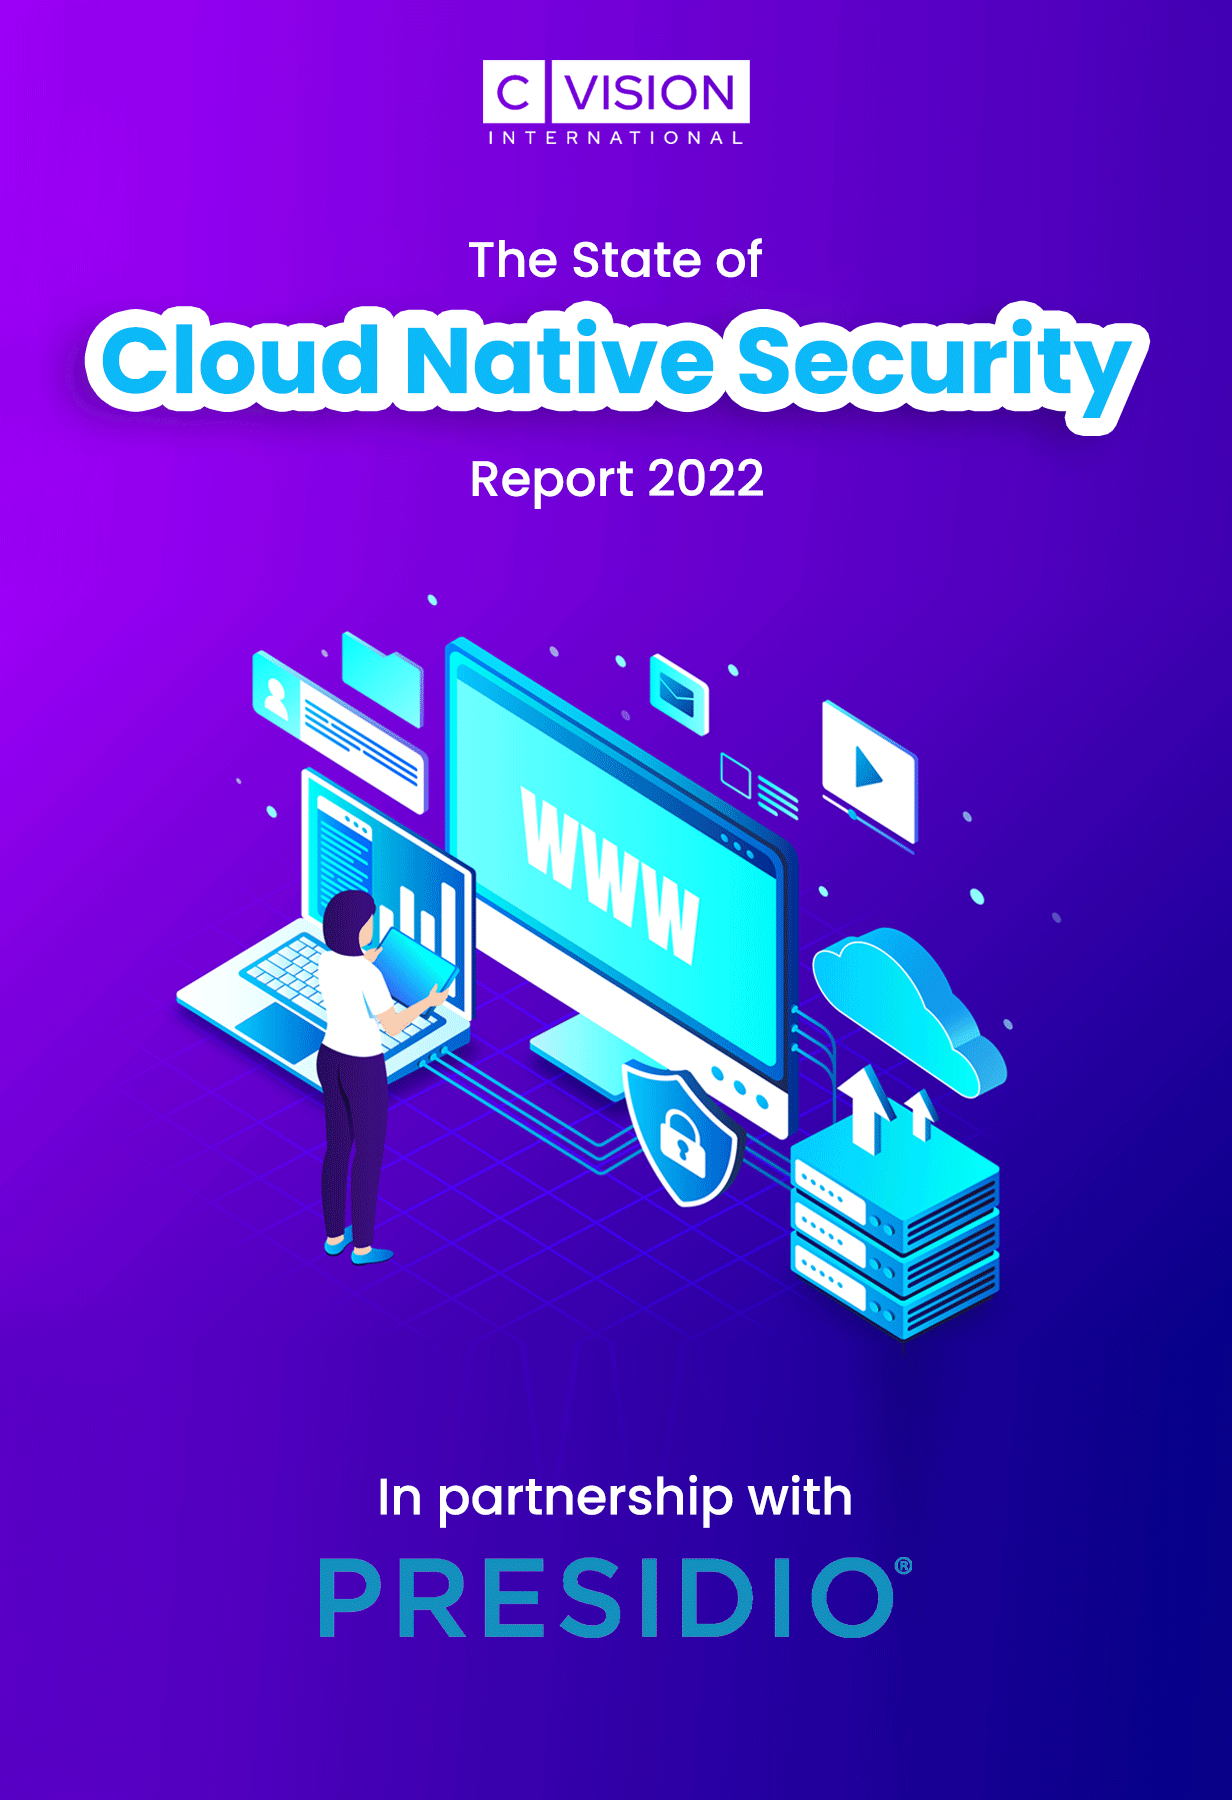 The State of Cloud Native Security Report 2022